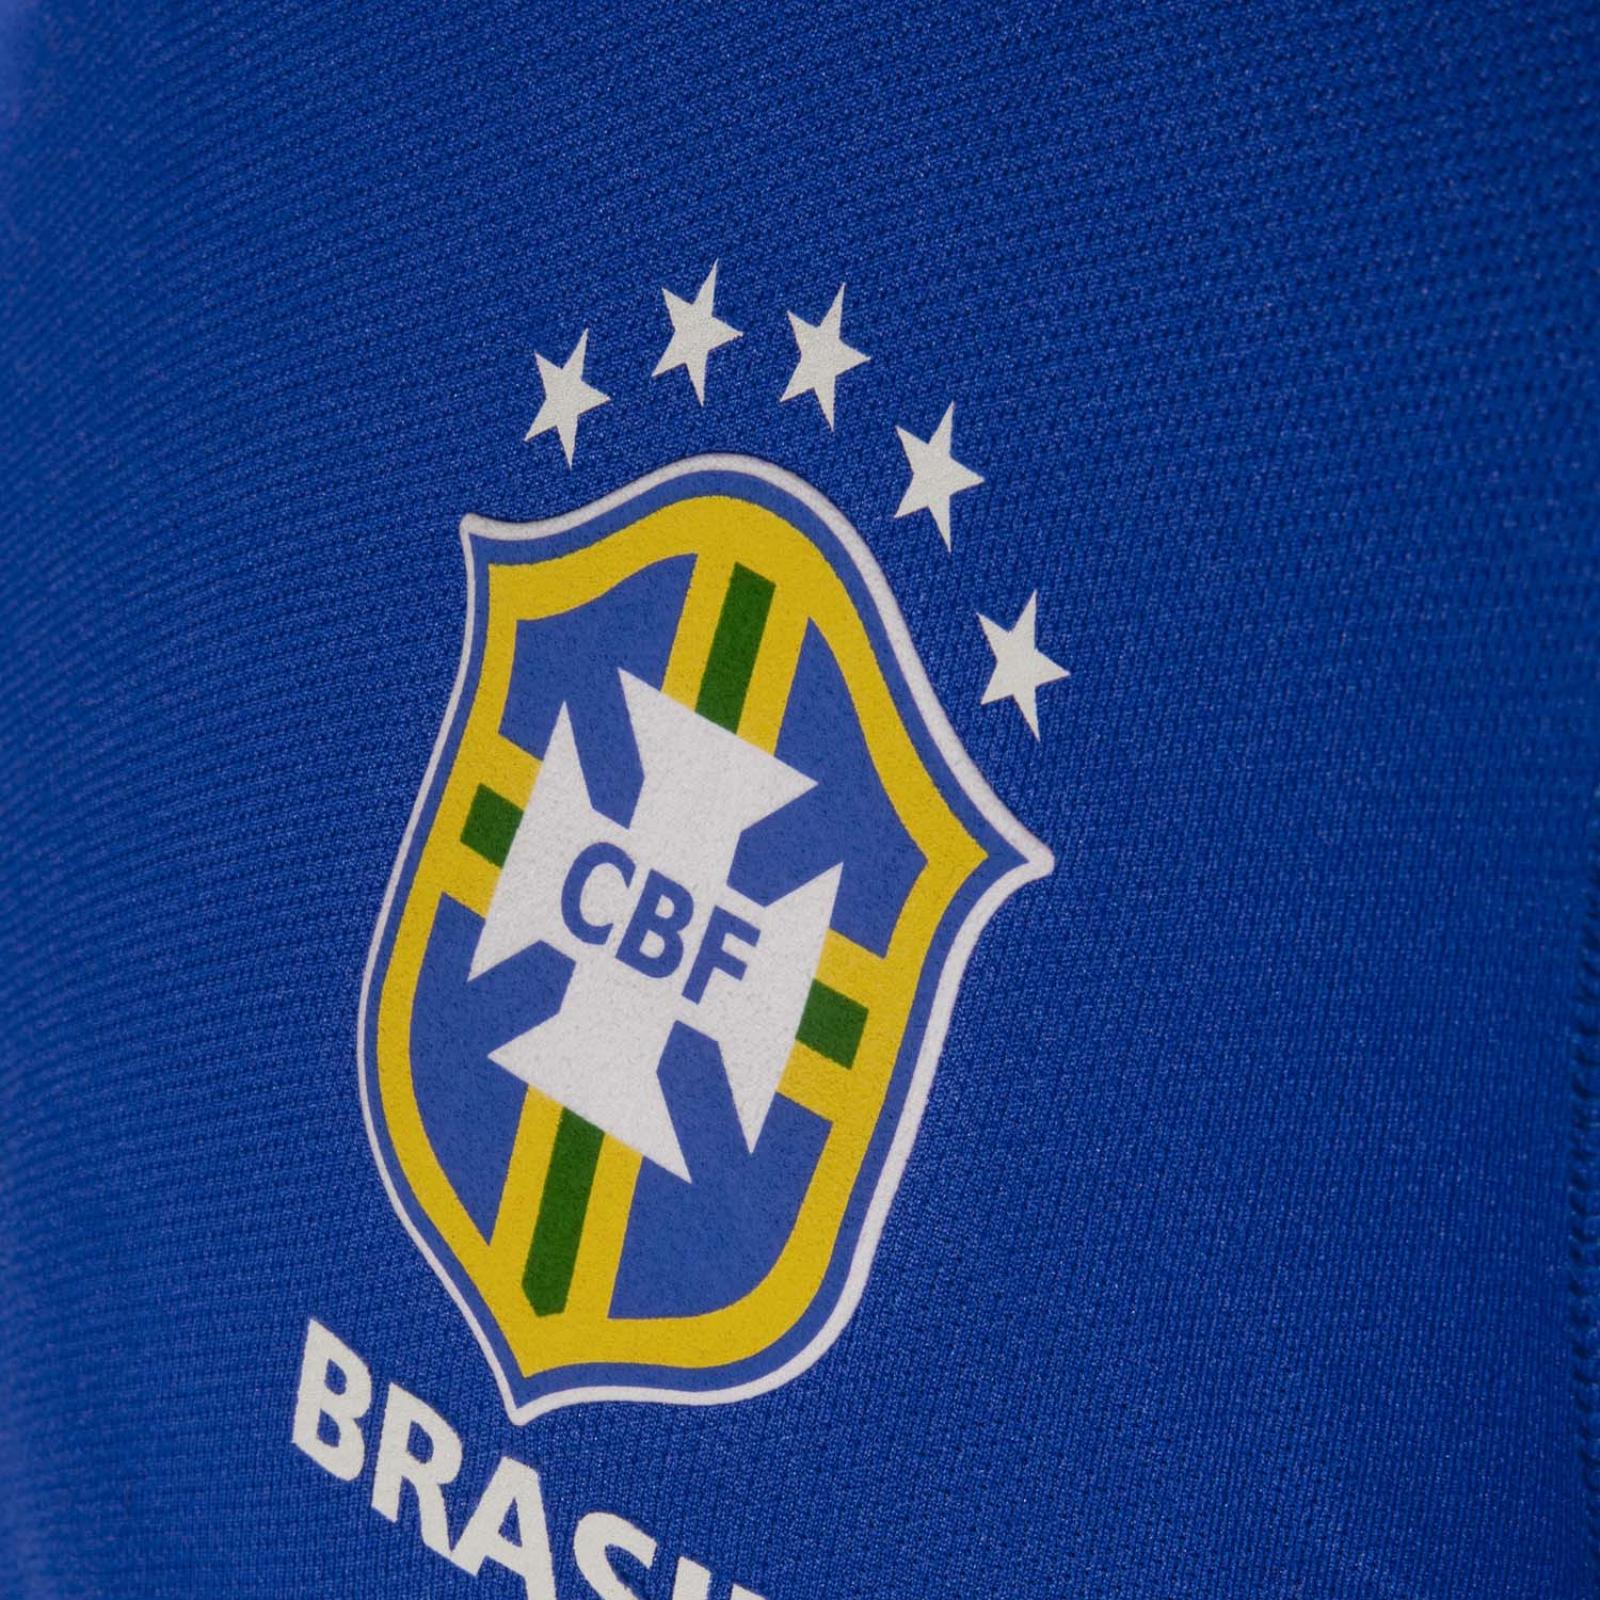 Nike Brazil 2013 Confed Cup Away Shirt Released - Footy Headlines